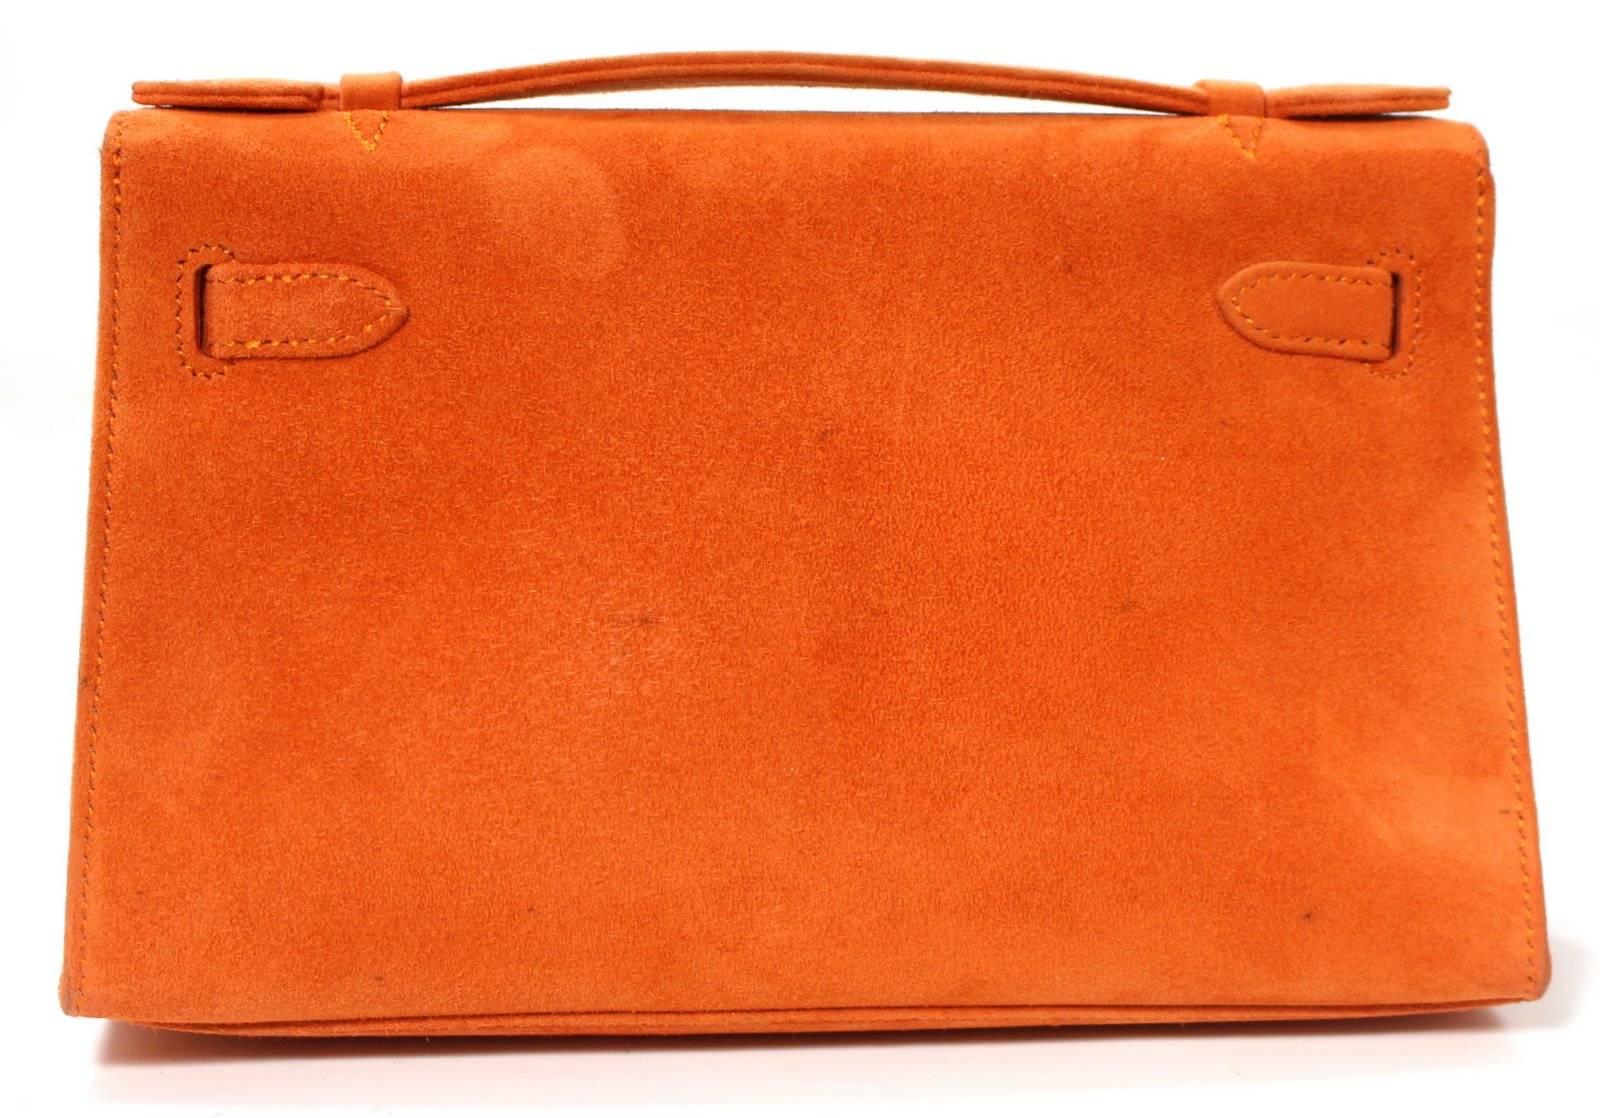 Hermès Orange Suede Kelly Pochette- EXCELLENT condition, approximate estimated current value $10,000.00.
Palladium hardware still has the protective plastic intact. There is mild corner wear and a few minor spots on the rear panel.    This is a